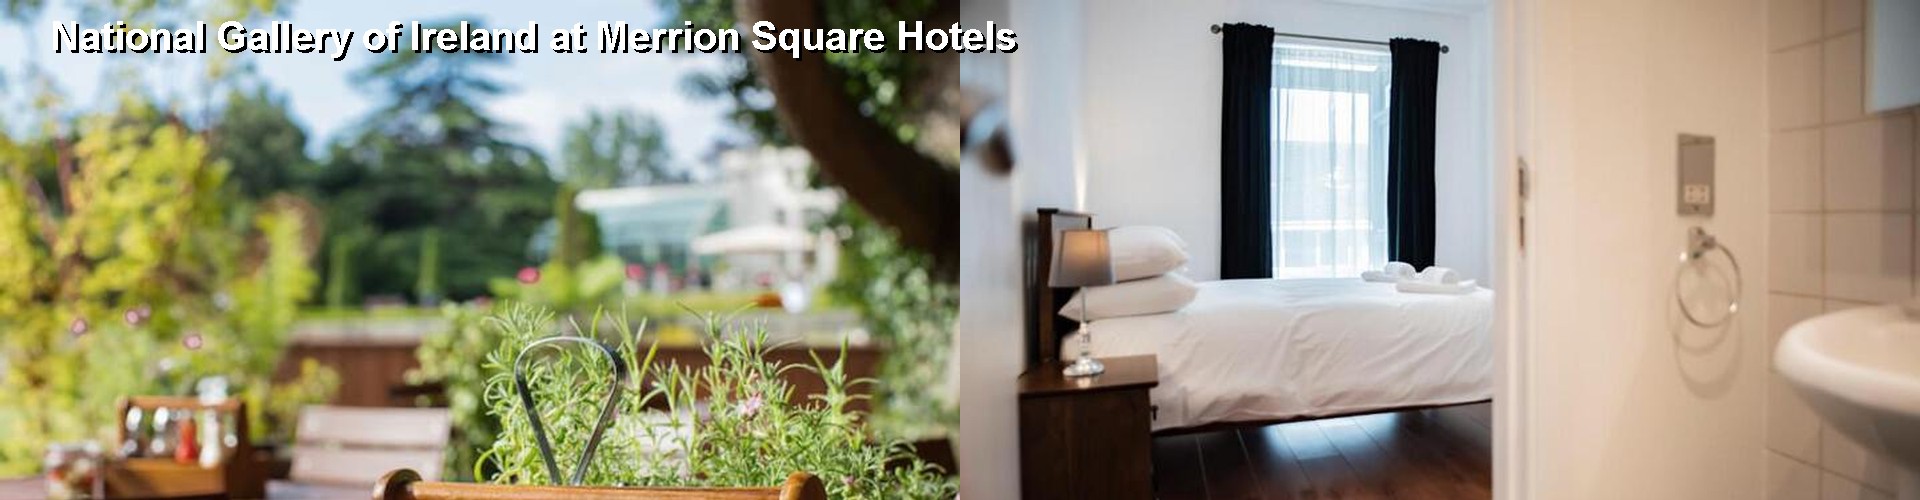 5 Best Hotels near National Gallery of Ireland at Merrion Square